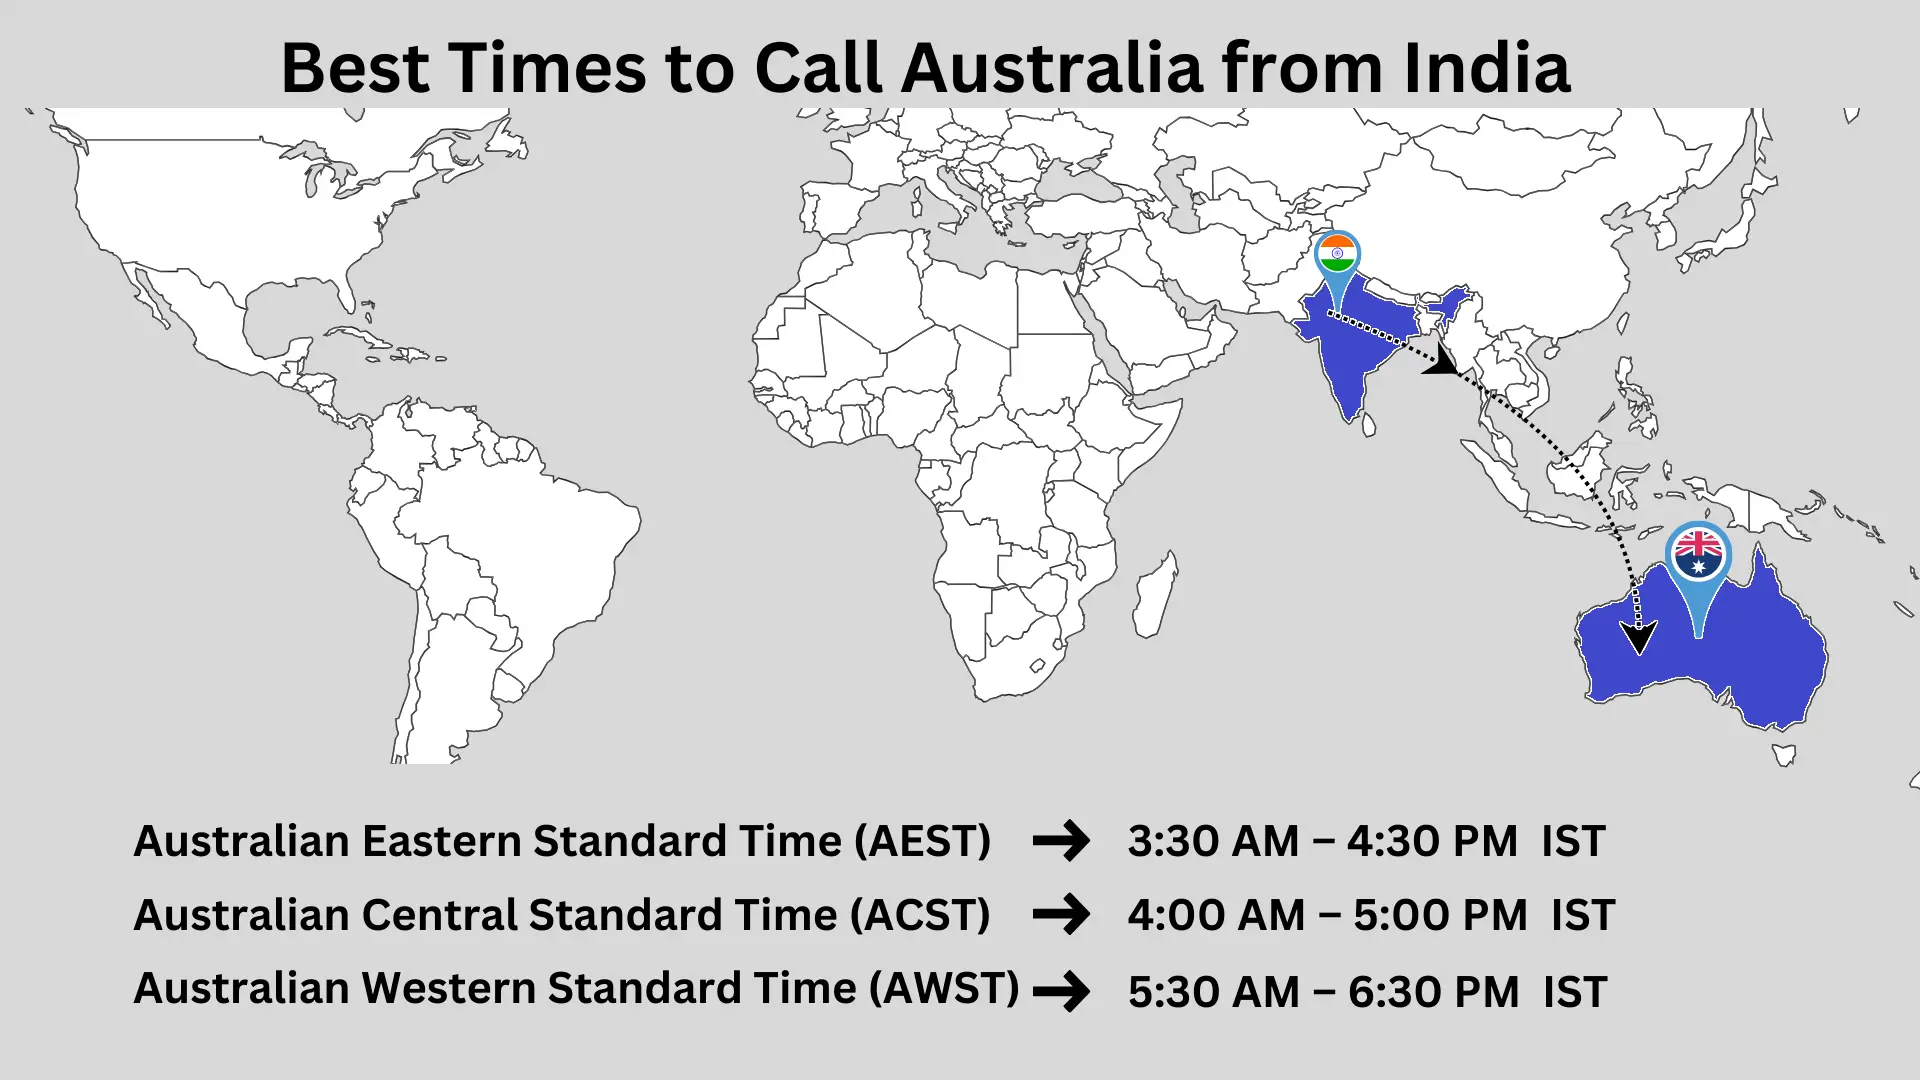 time zone to call from India to australia